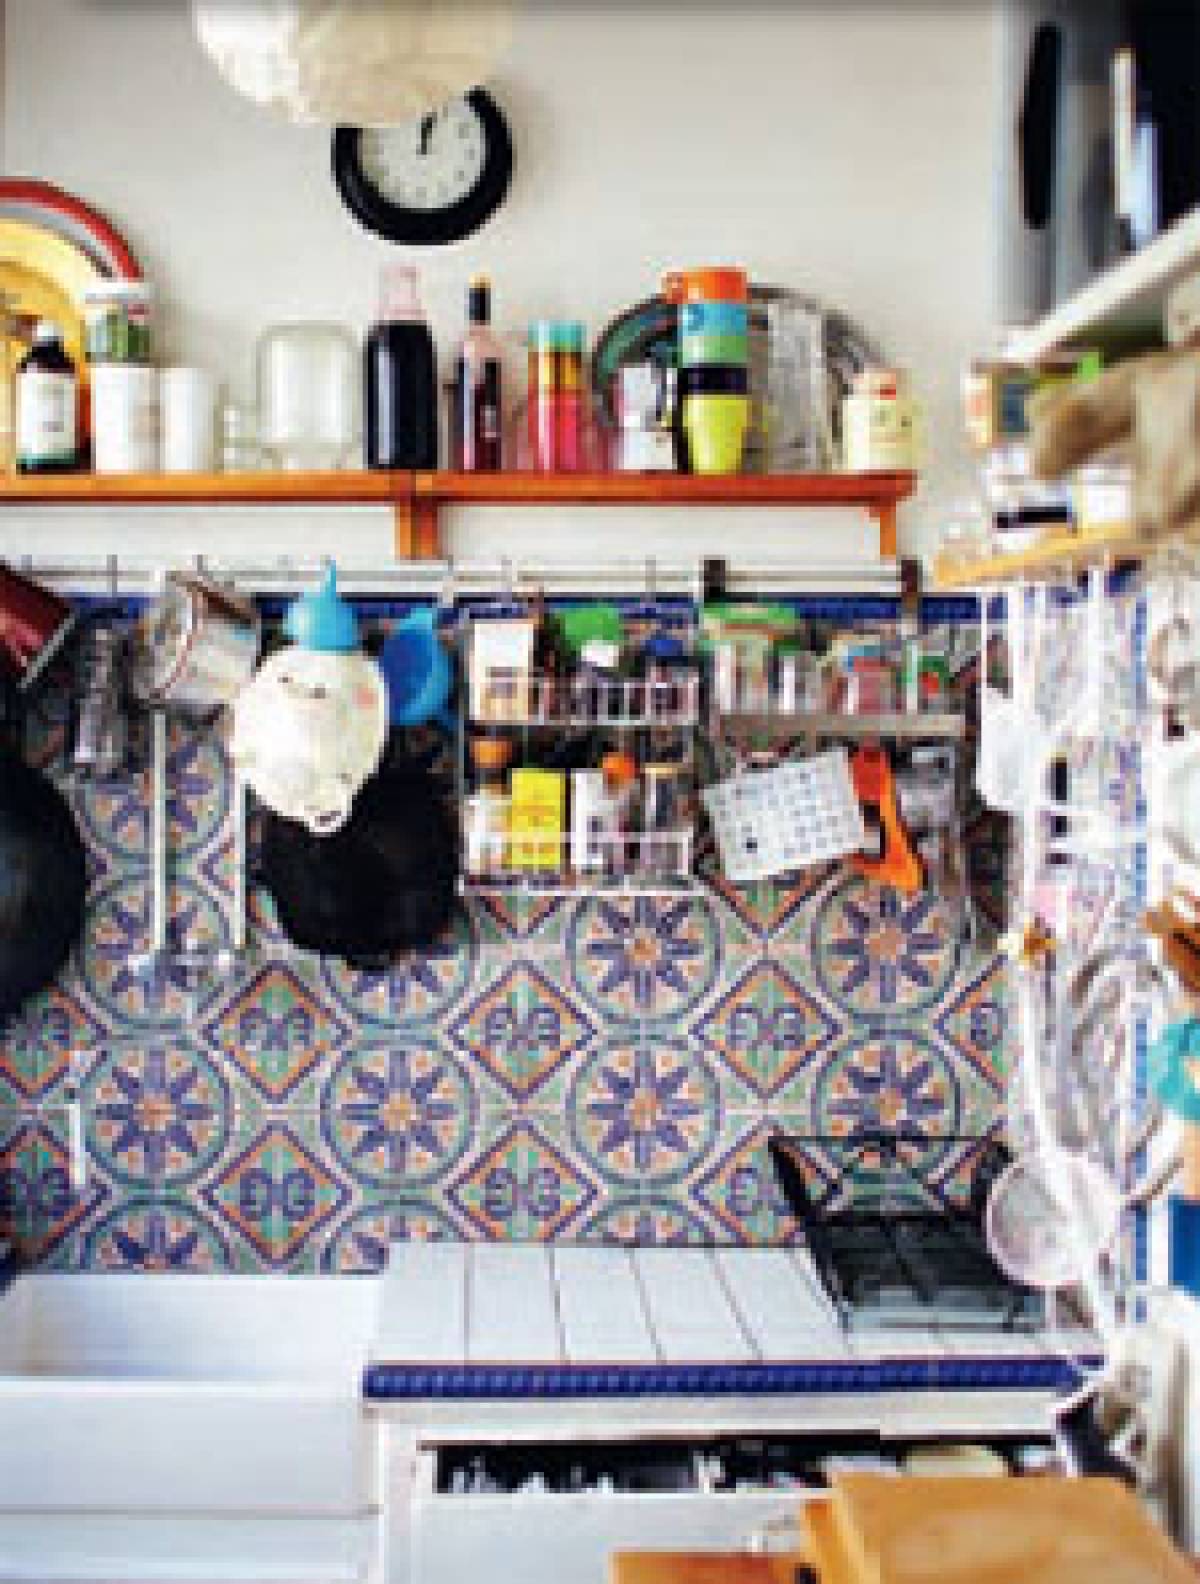 Tips for keeping a little Paris kitchen